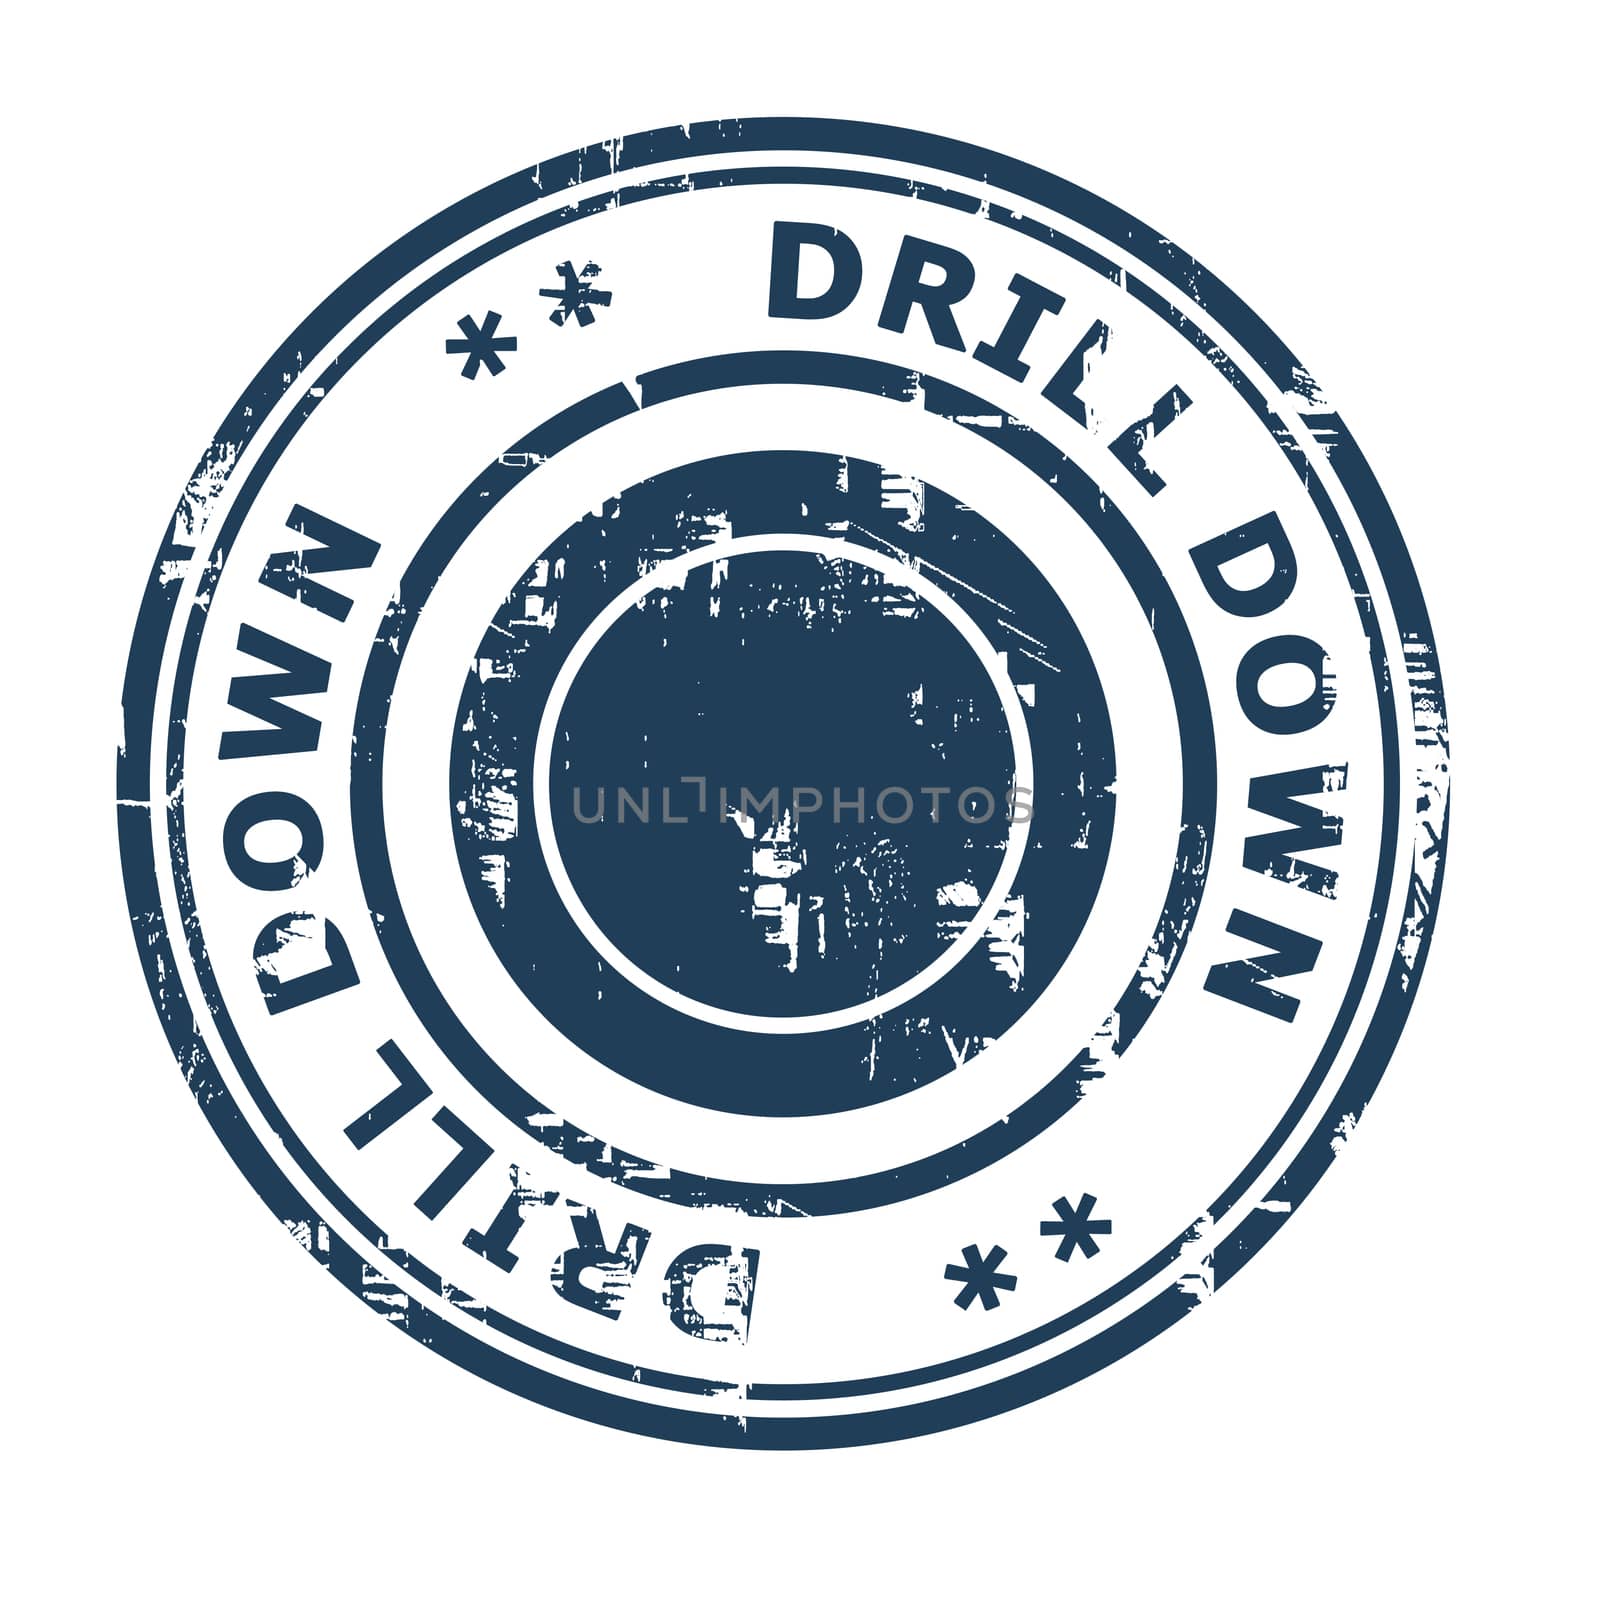 Drill Down business concept rubber stamp isolated on a white background.